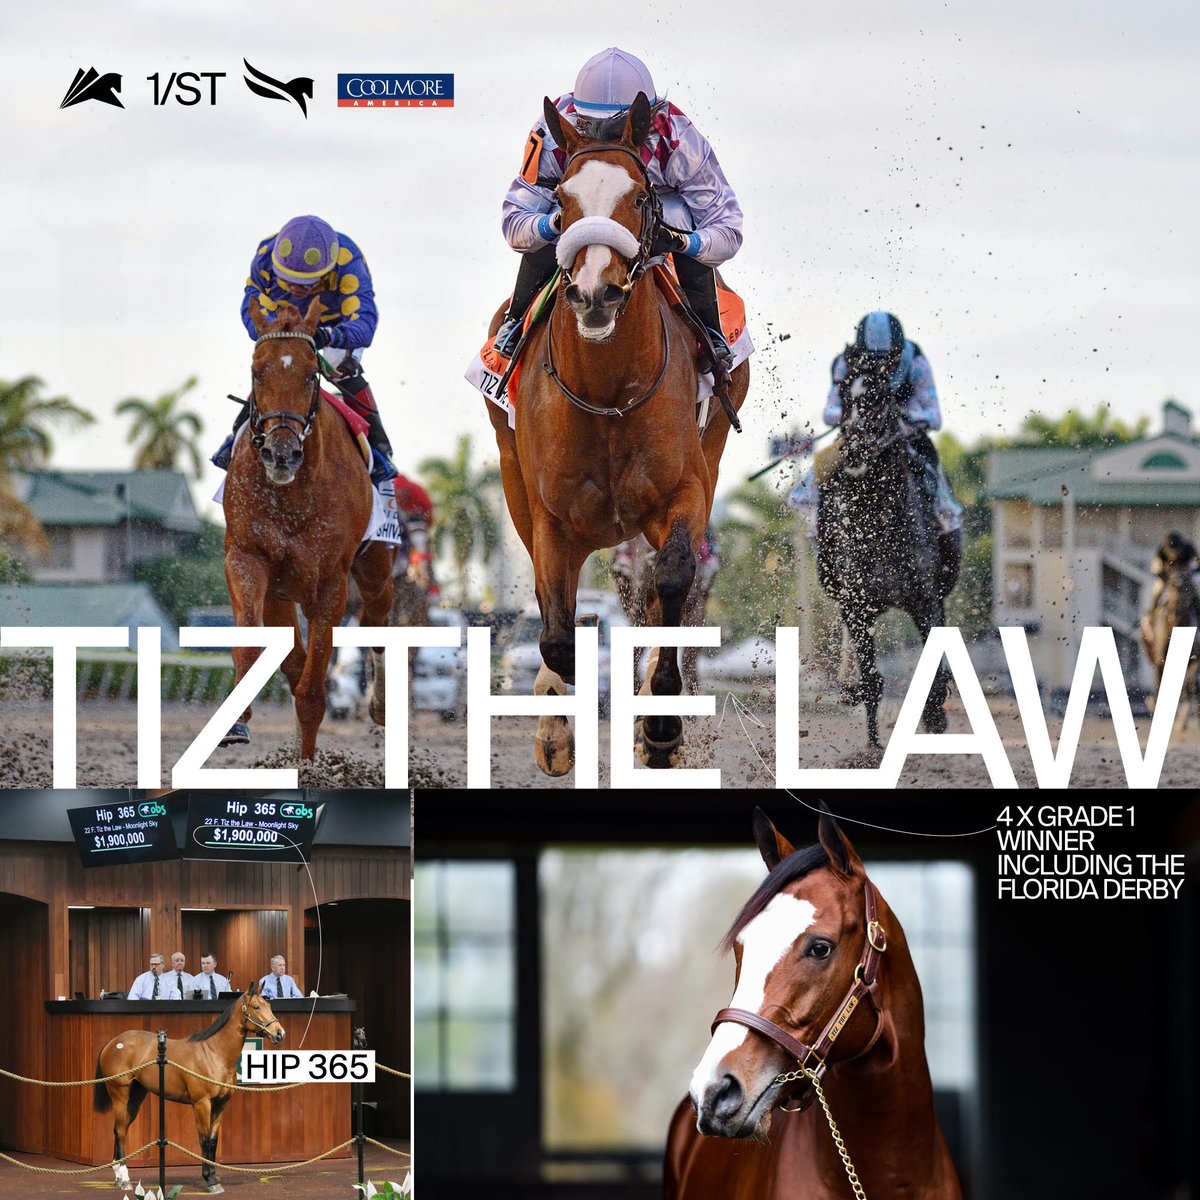 Today we're highlighting a 4x Grade 1 Champion and past Florida Derby and Holy Bull winner, Tiz the Law! Among his first two-year-olds is a promising $1.9 million filly out of Moonlight Sky.